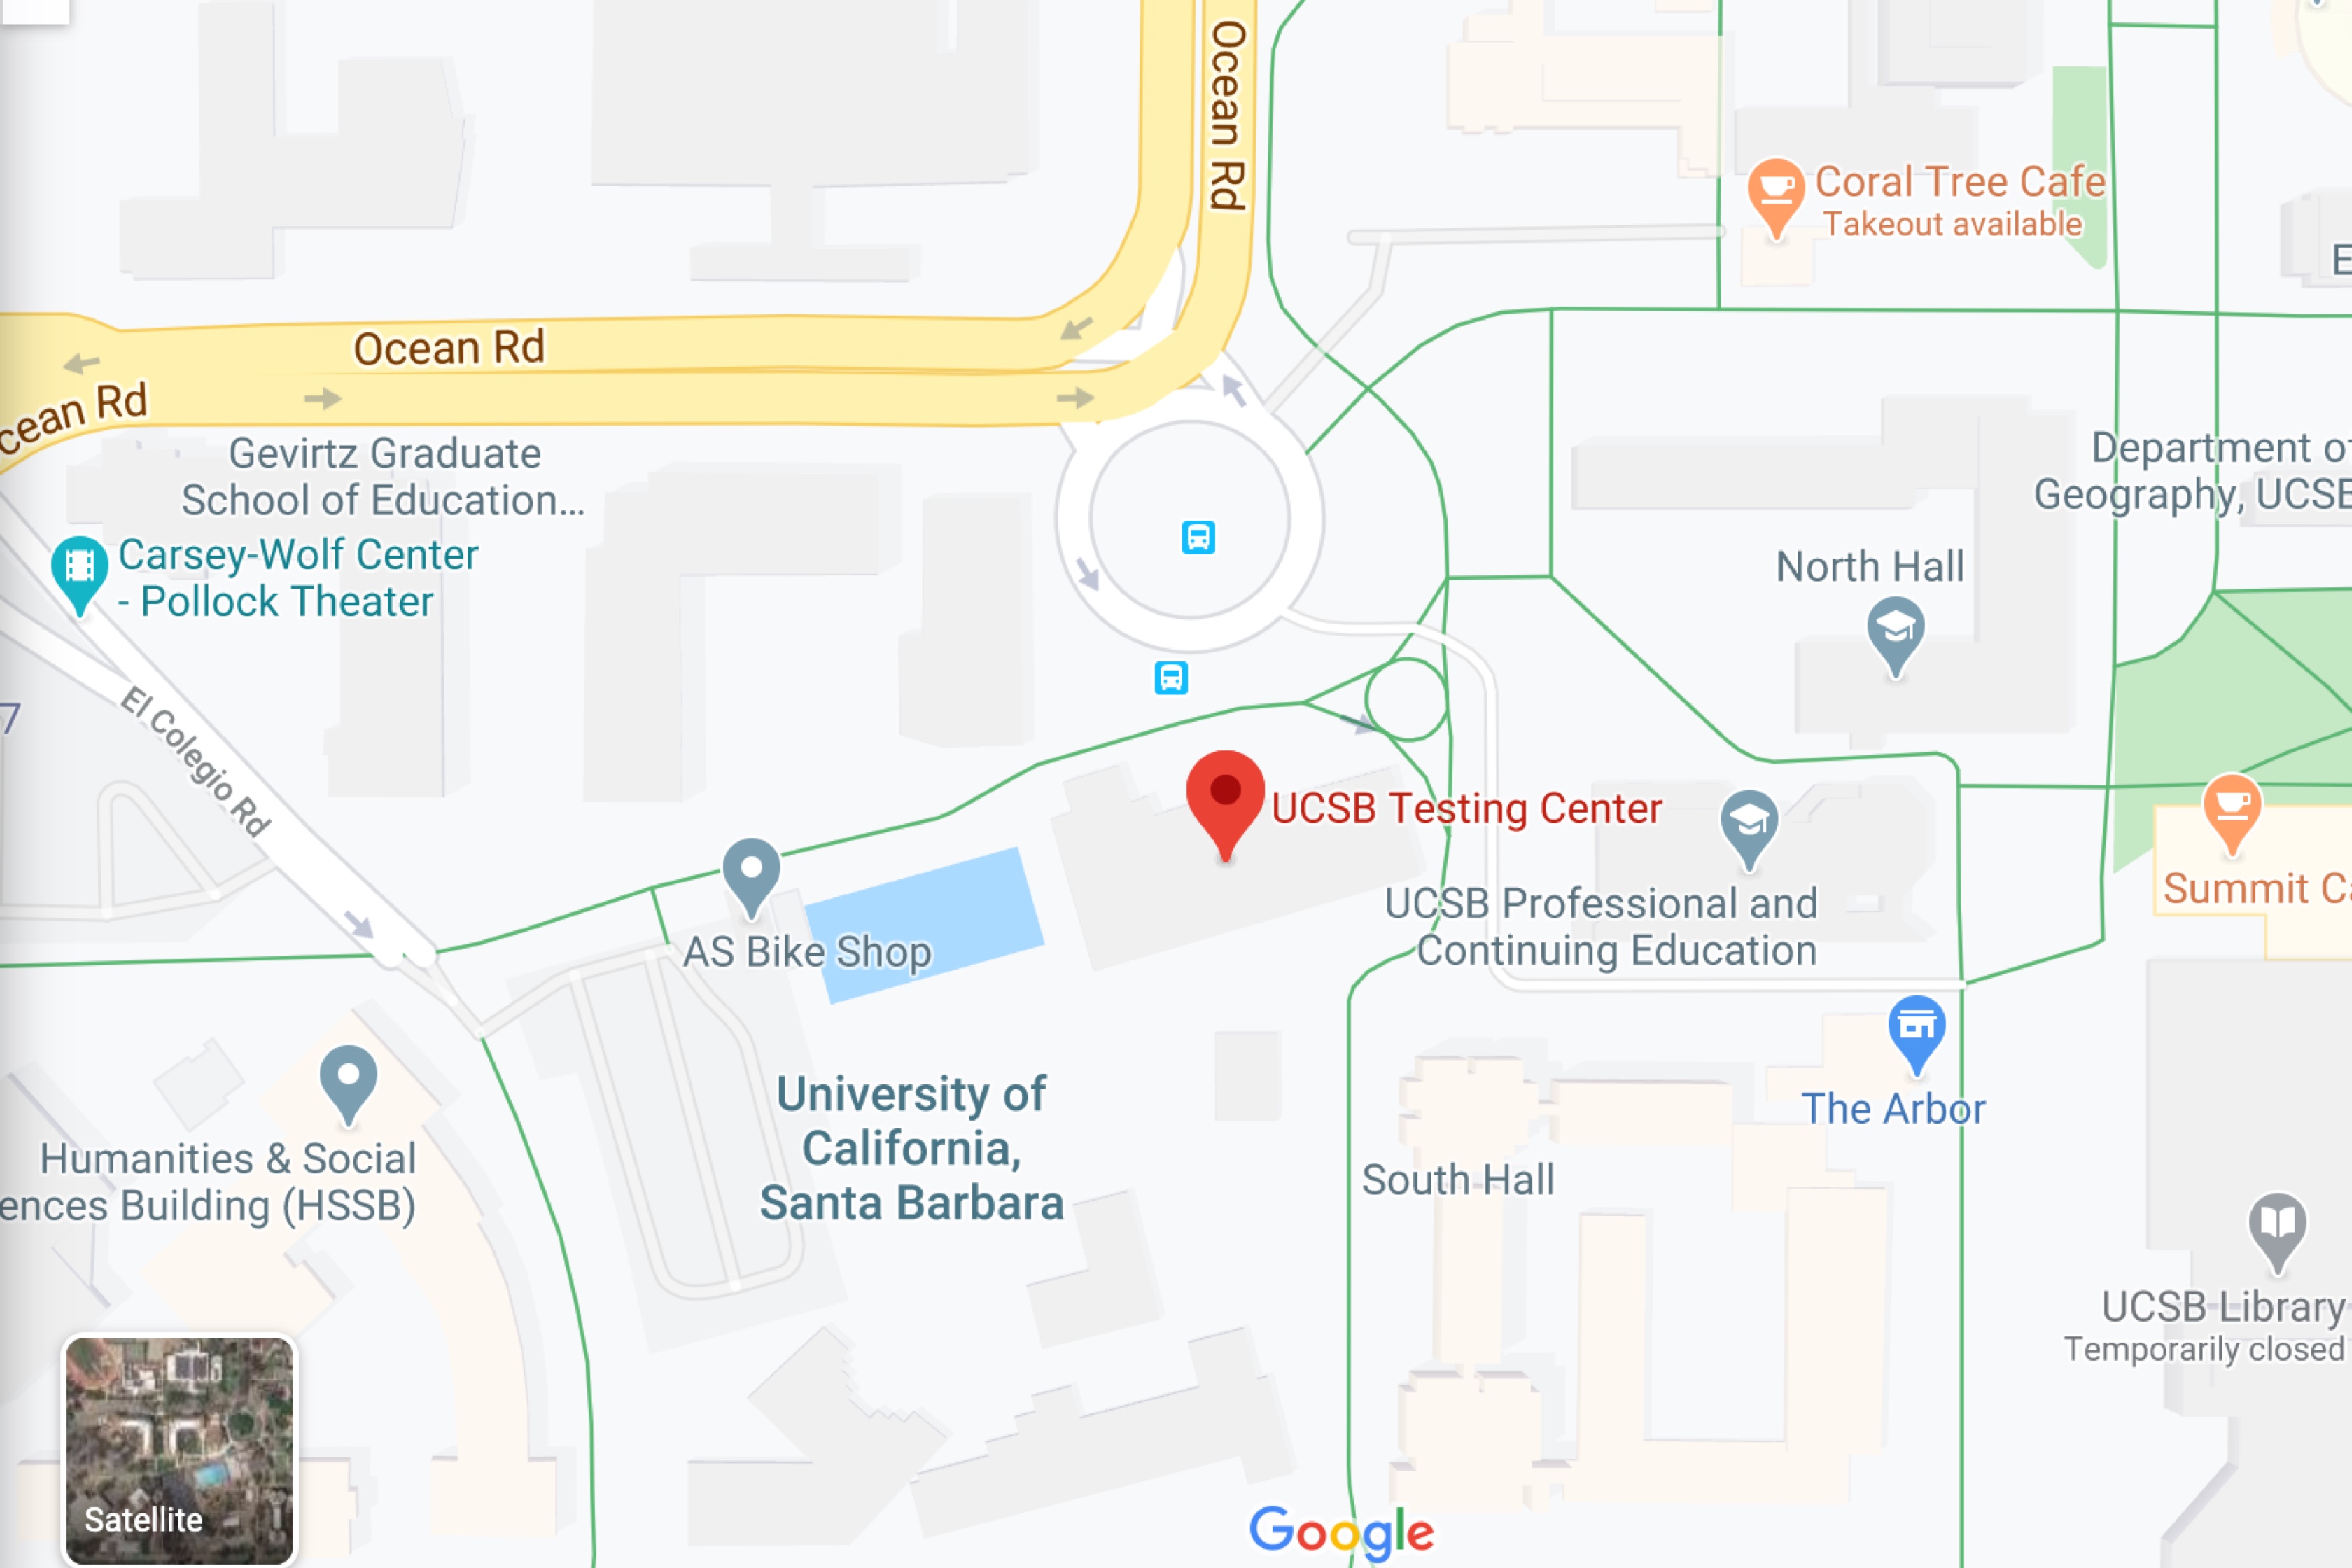 Google Map showing the UCSB Testing Center